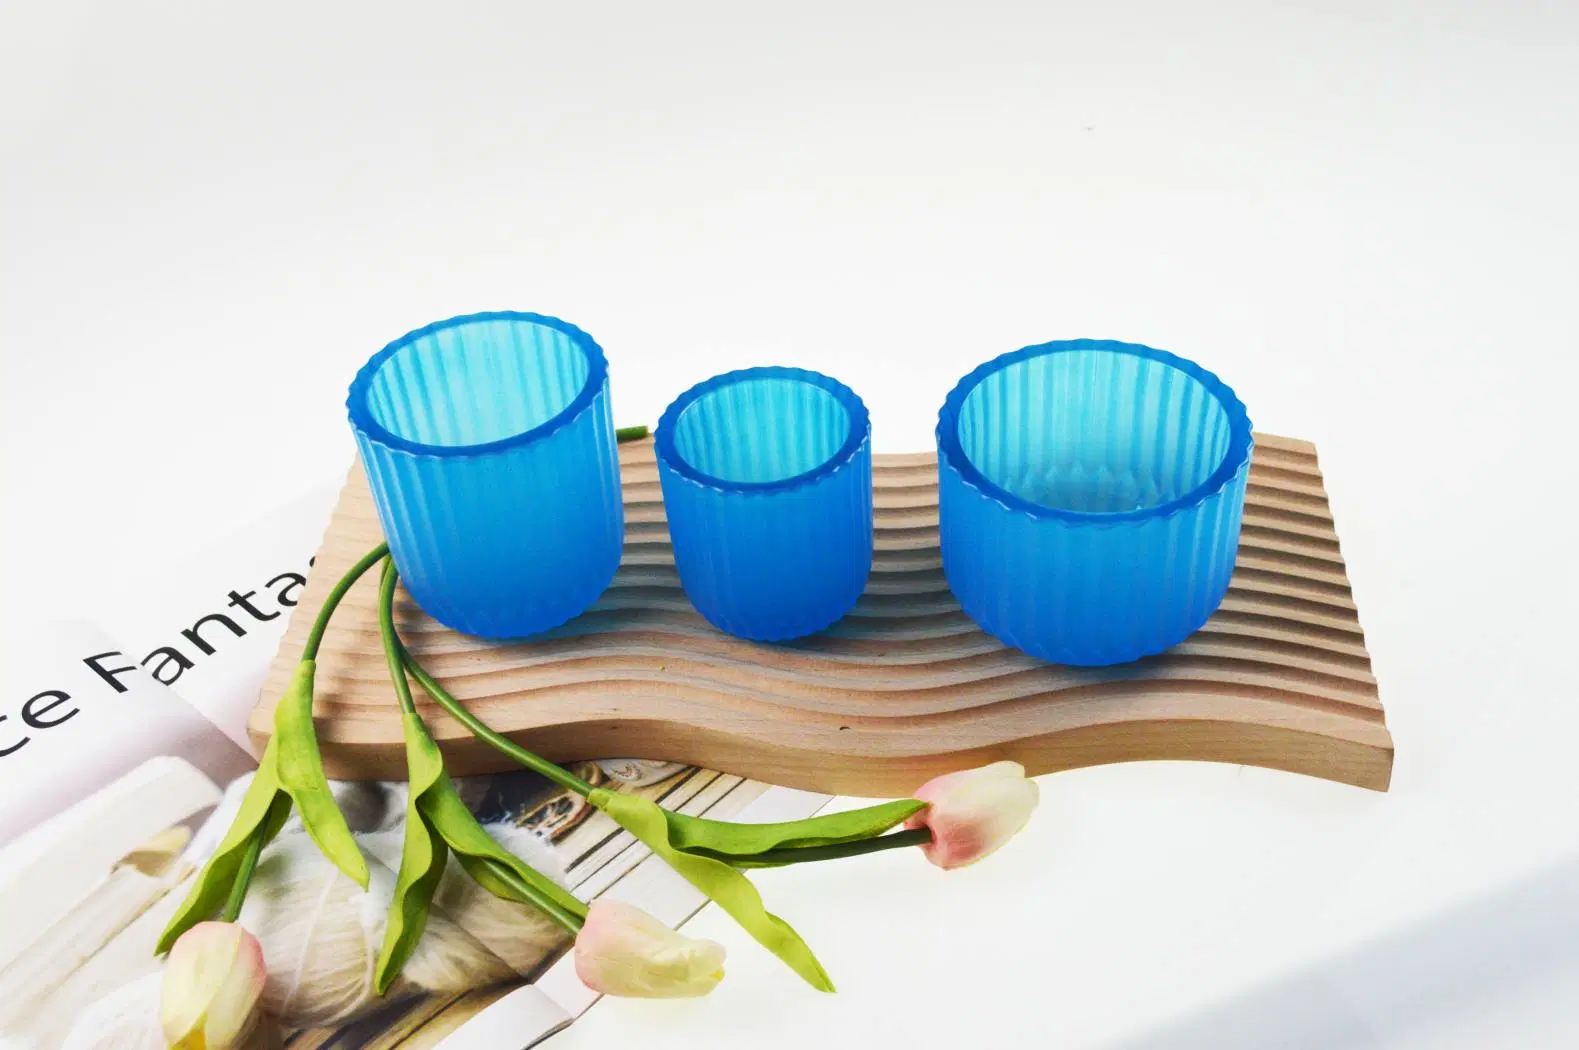 Bowl-Shaped Candle Holders Set of Three